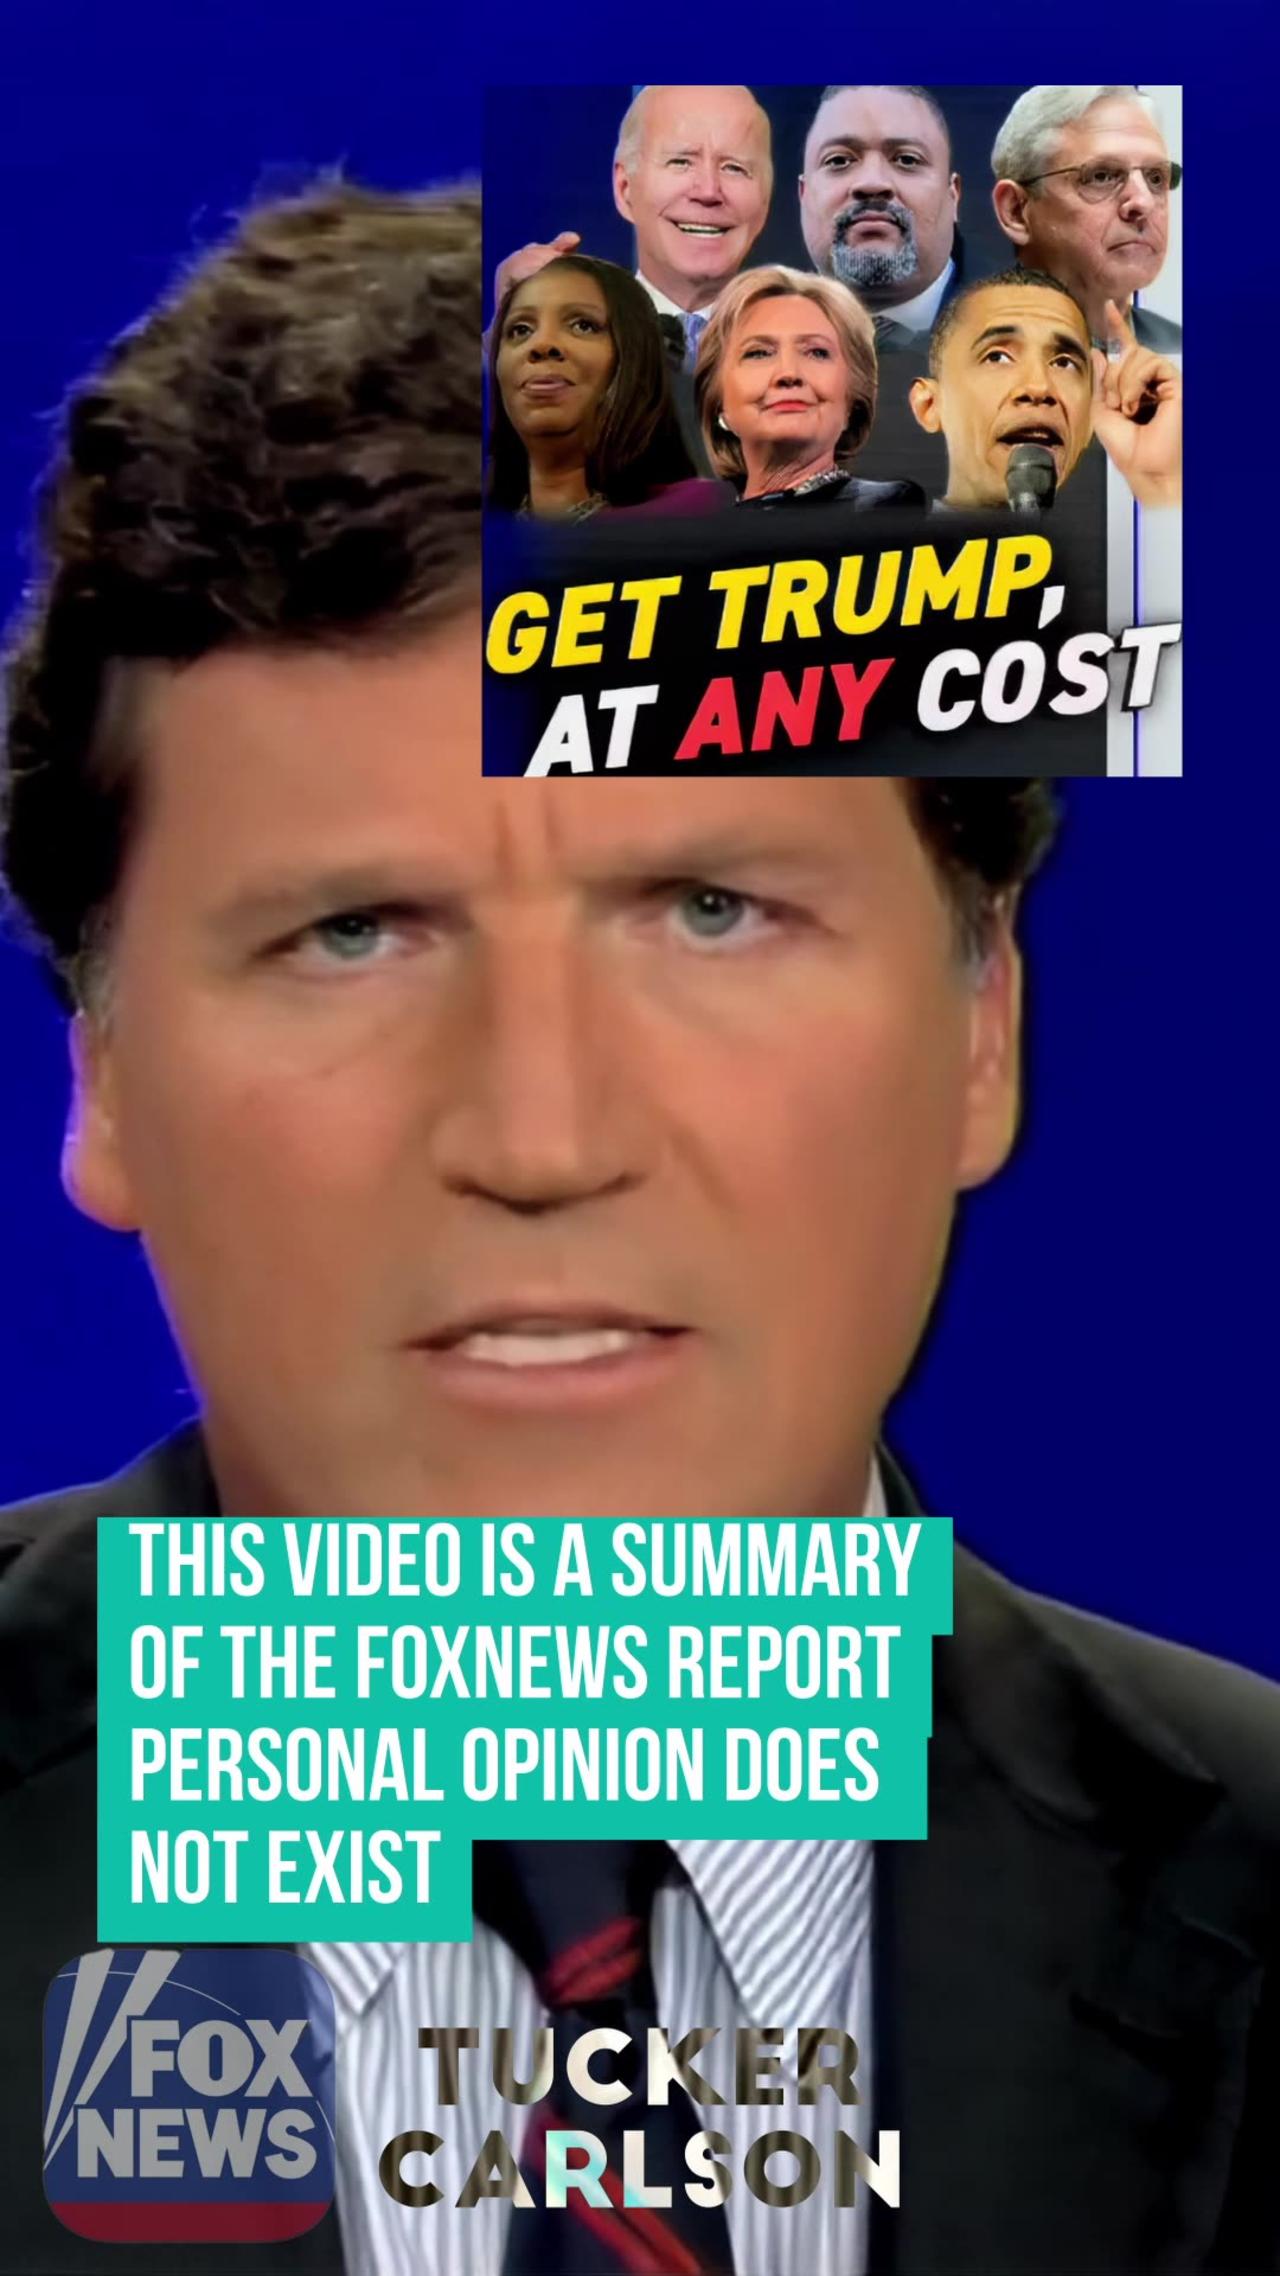 Tucker Carlson, Spending All Of His Time Trying To Destroy His Political Opponents